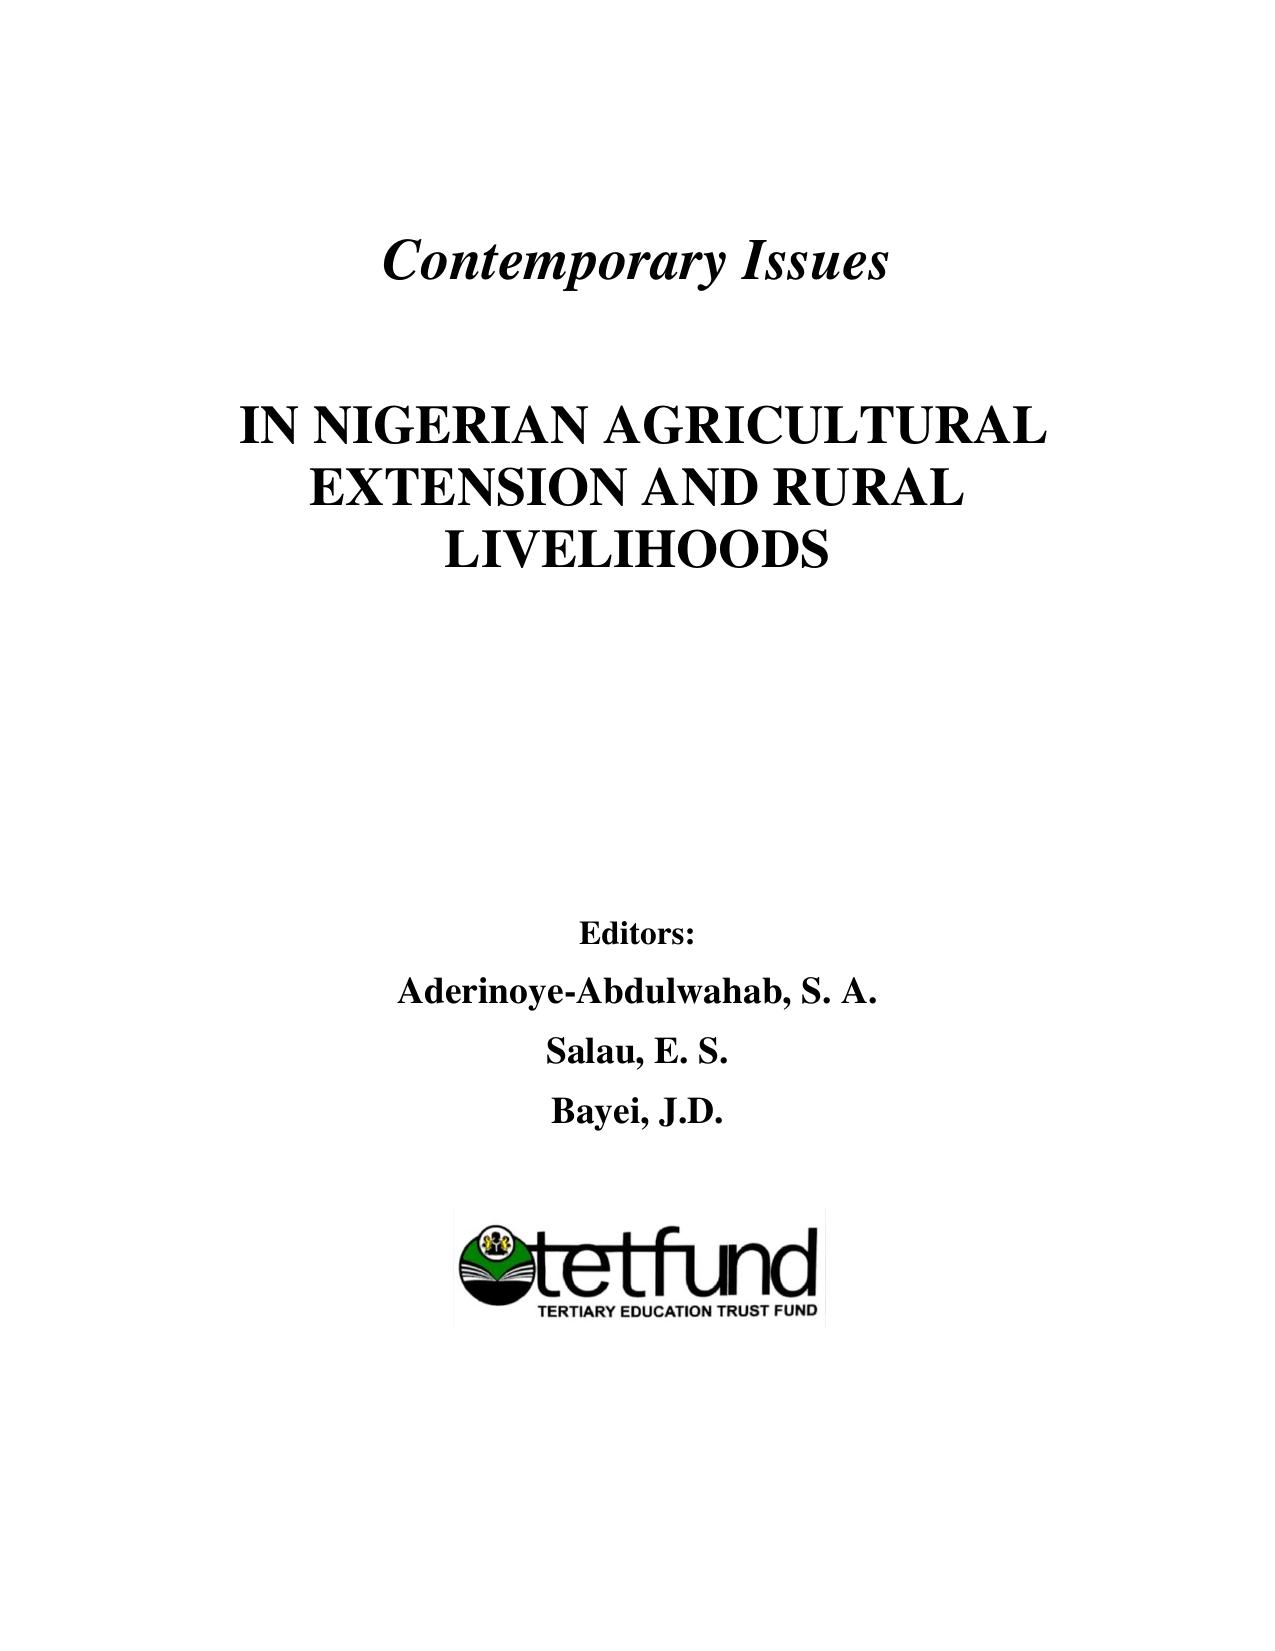 Contemporary Issues IN NIGERIAN AGRICULTURAL EXTENSION AND RURAL LIVELIHOODS 2019